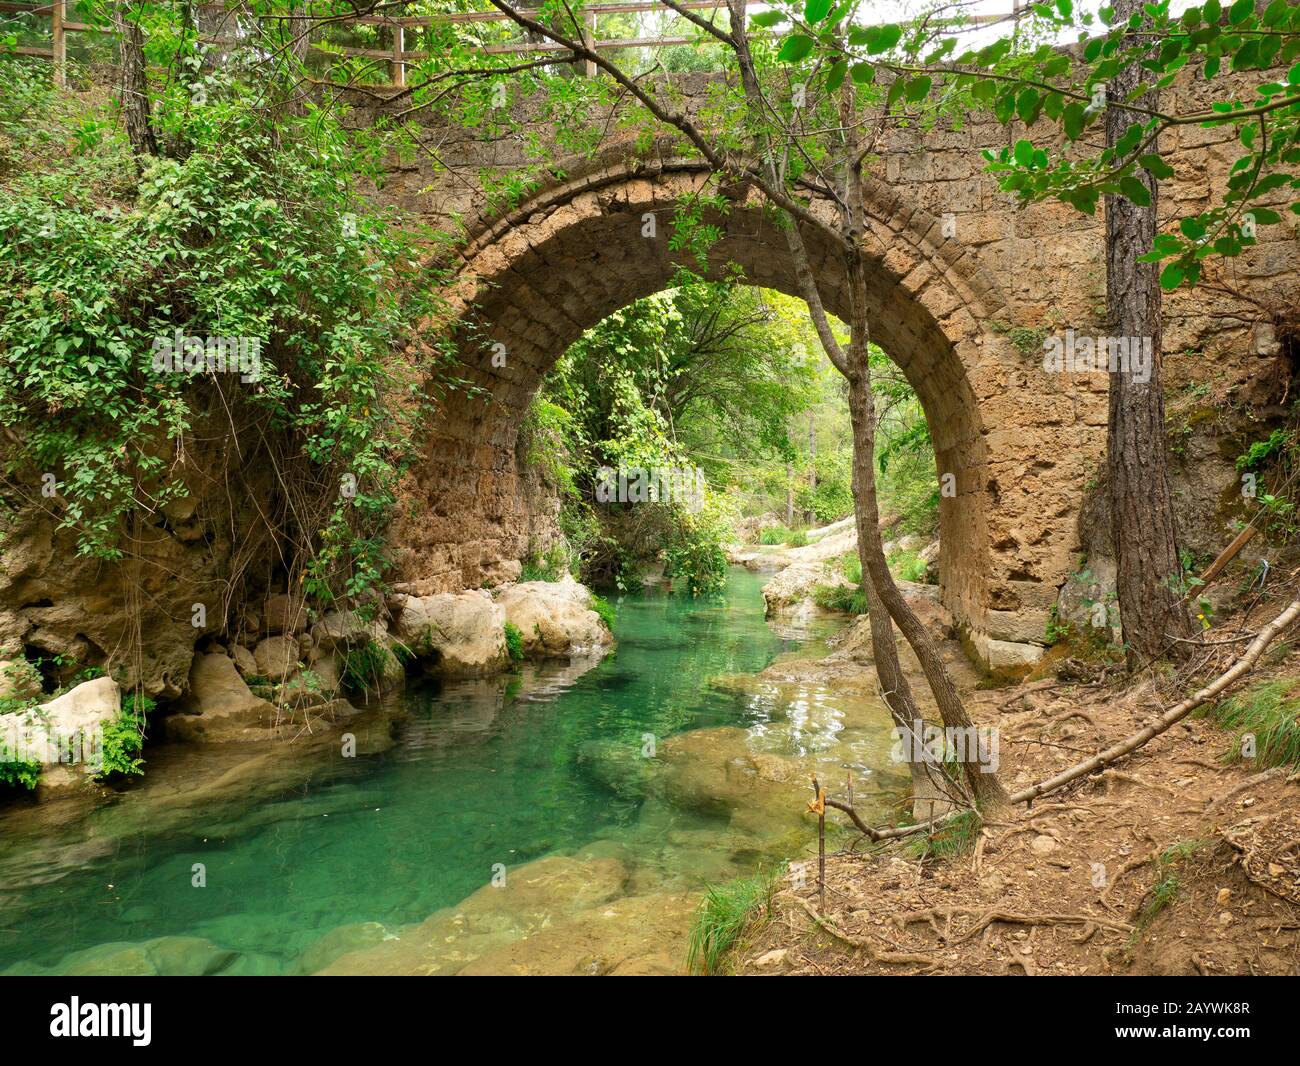 Medieval stone bridge over river in a forest with trees around known as " Puente de las Herrerías" at the Sierra de Cazorla in Jaén, Andalusia, Spain  Stock Photo - Alamy